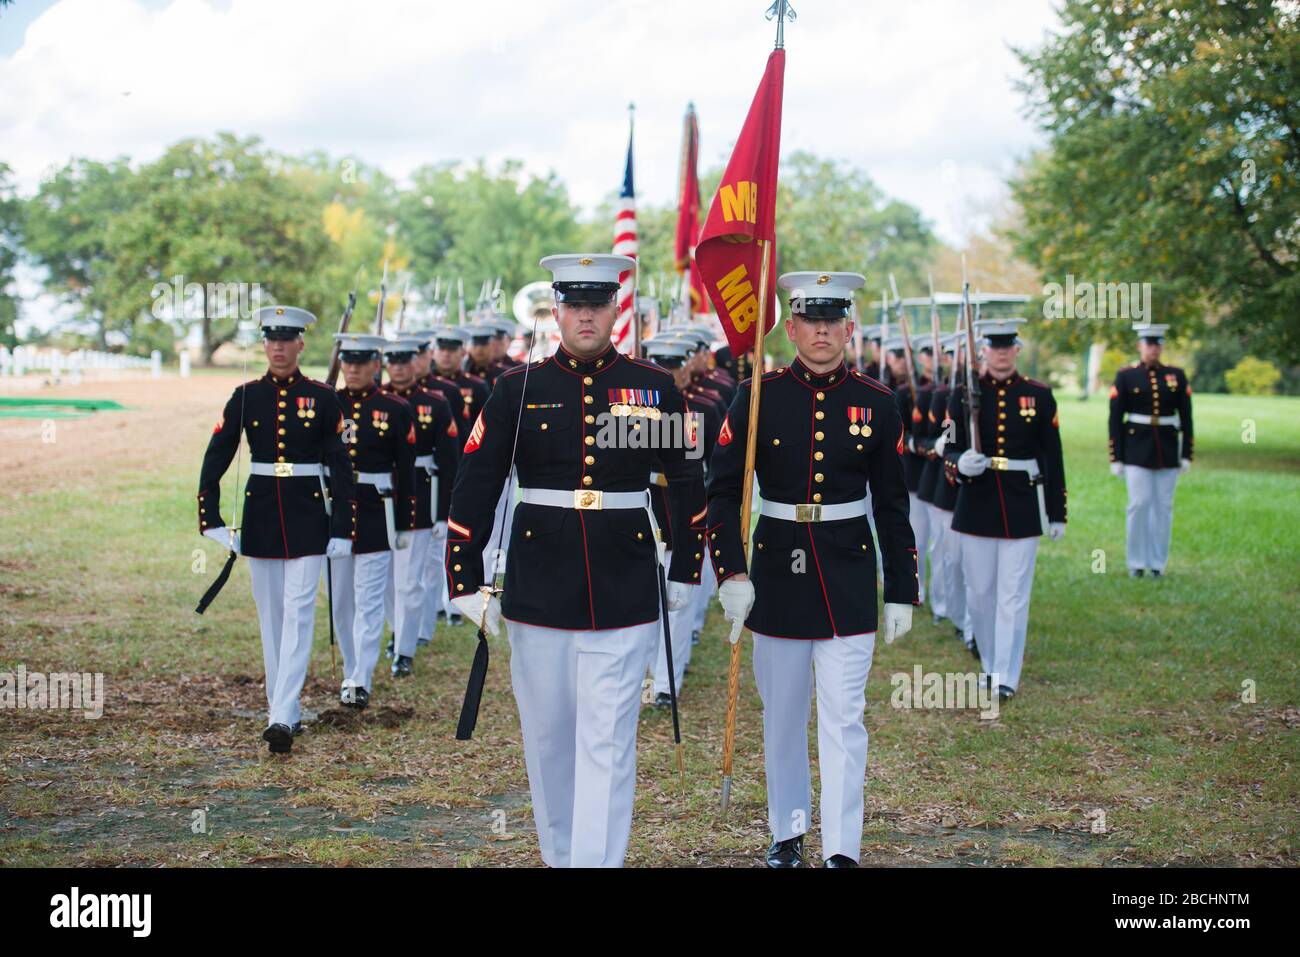 'Marines from Marine Barracks, Washington, D.C. (8th and I) participate in the full honors funeral of U.S. Marine Corps 2nd Lt. George S. Bussa in Section 60 of Arlington National Cemetery, Arlington, Va., Oct. 10, 2017.  In November 1943, Bussa was assigned to Company F, 2nd Battalion, 8th Marines, 2nd Marine Division, which landed against stiff Japanese resistance on the small island of Betio in the Tarawa Atoll of the Gilbert Islands, in an attempt to secure the island. Over several days of intense fighting at Tarawa, approximately 1,000 Marines and Sailors were killed and more than 2,000 w Stock Photo